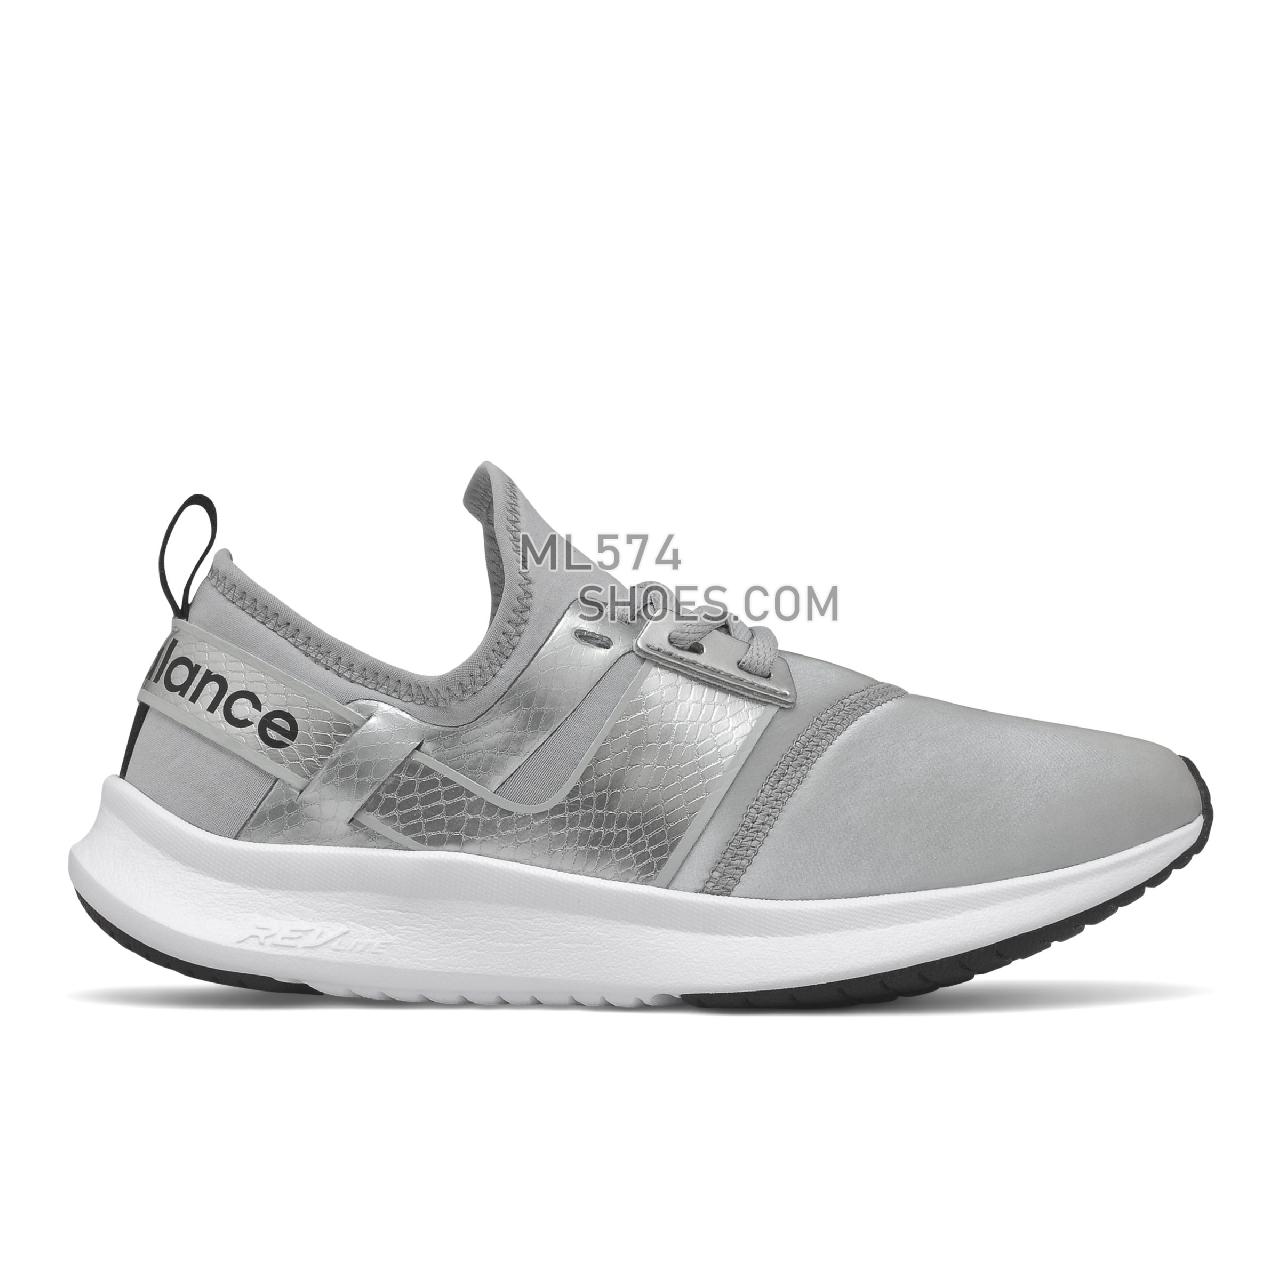 New Balance NB Nergize Sport - Women's Sport Style Sneakers - Light Aluminum with Silver Metallic - WNRGSAN1